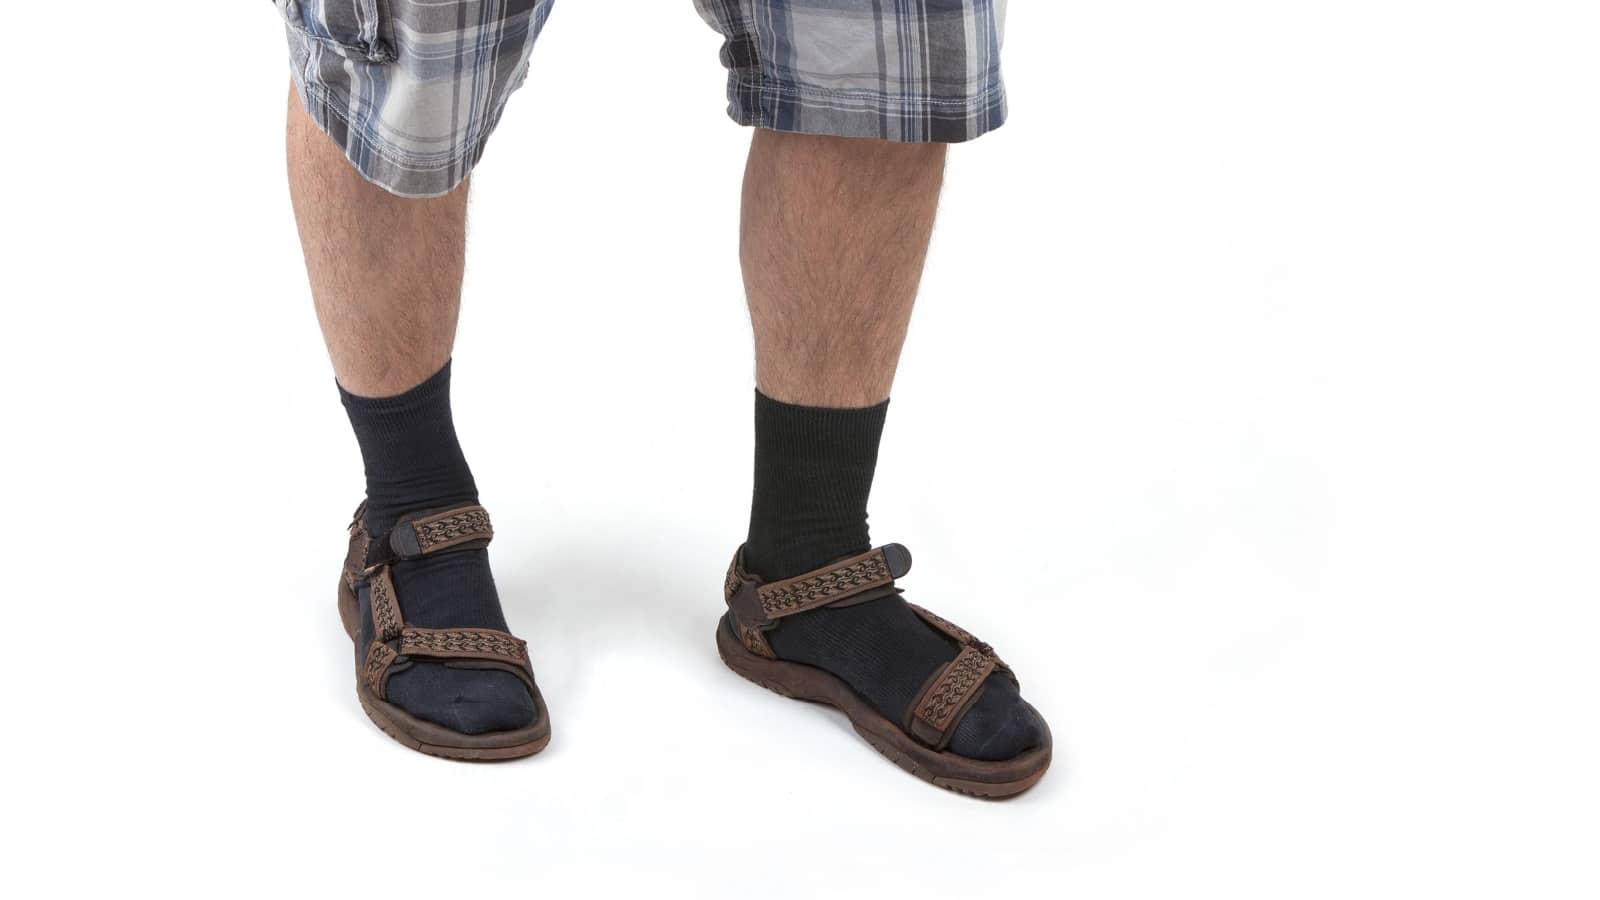 Beauty: studio shot of a man wearing sandals with socks and having hairy legs, isolated on white.